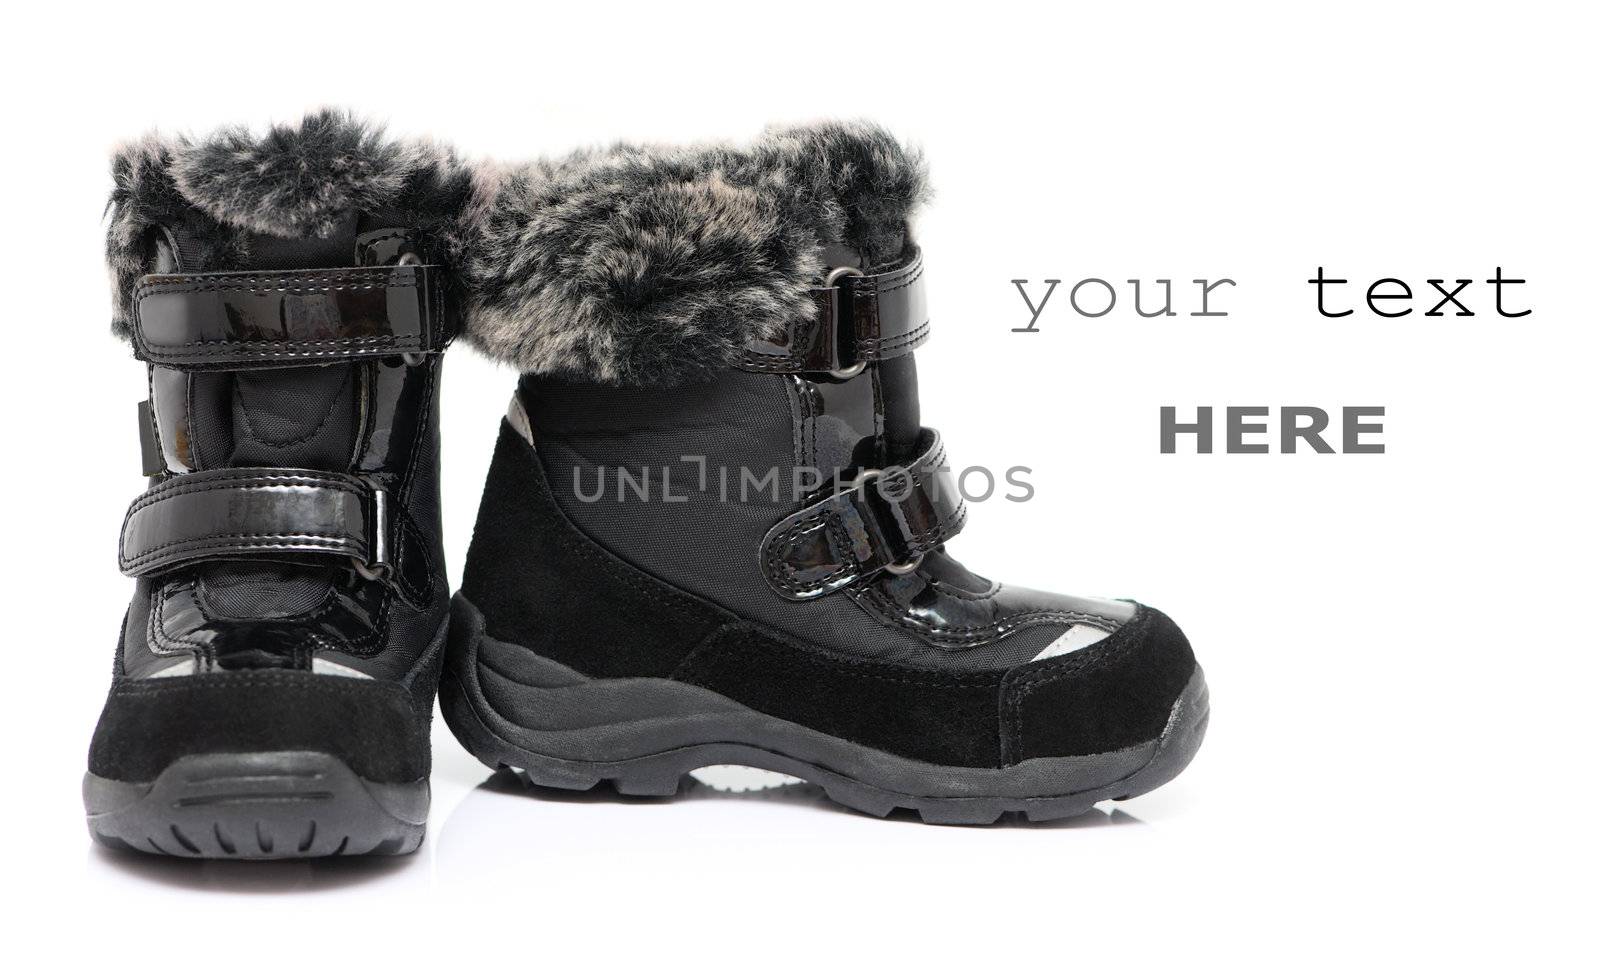 Black child's winter boots  by Olinkau